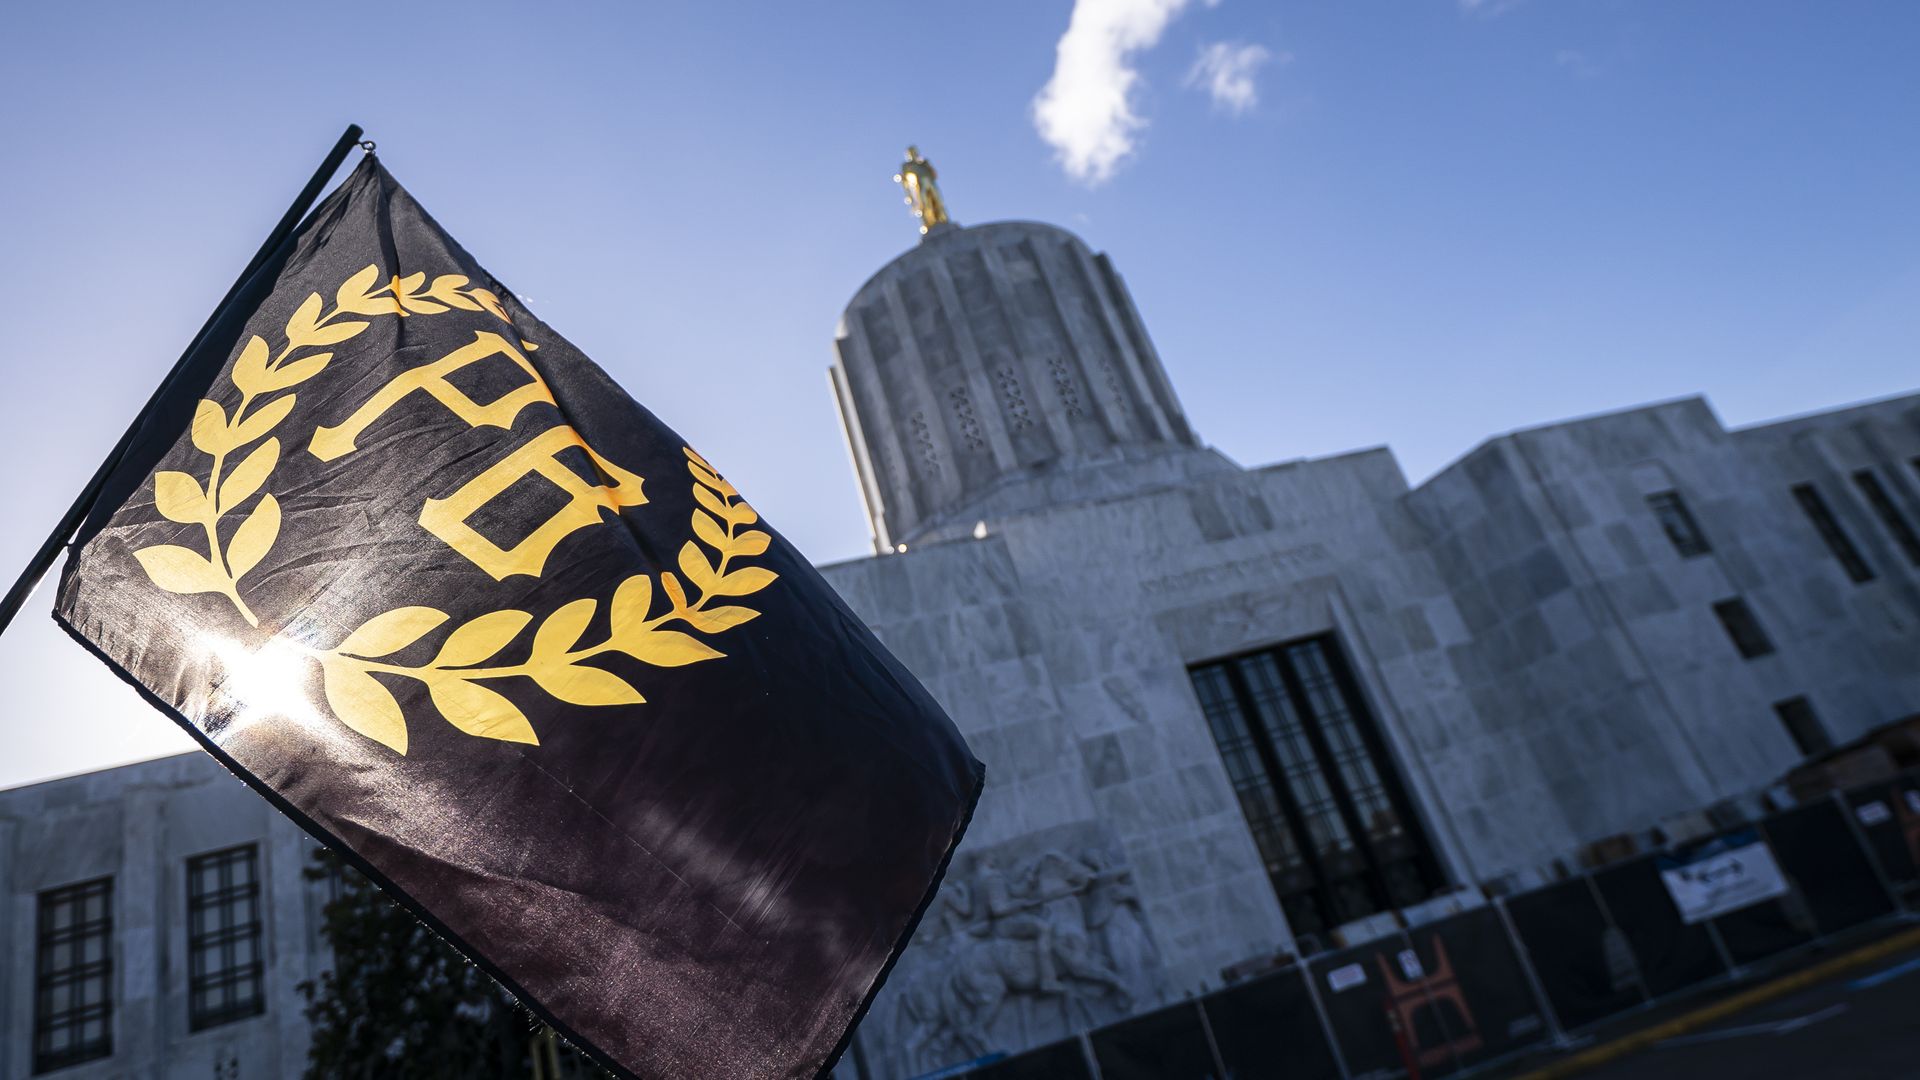 A Proud Boy flag flies in front of the Oregon state capitol during a protest in support of the January 6 attack on the U.S. Capitol on January 8, 2022.